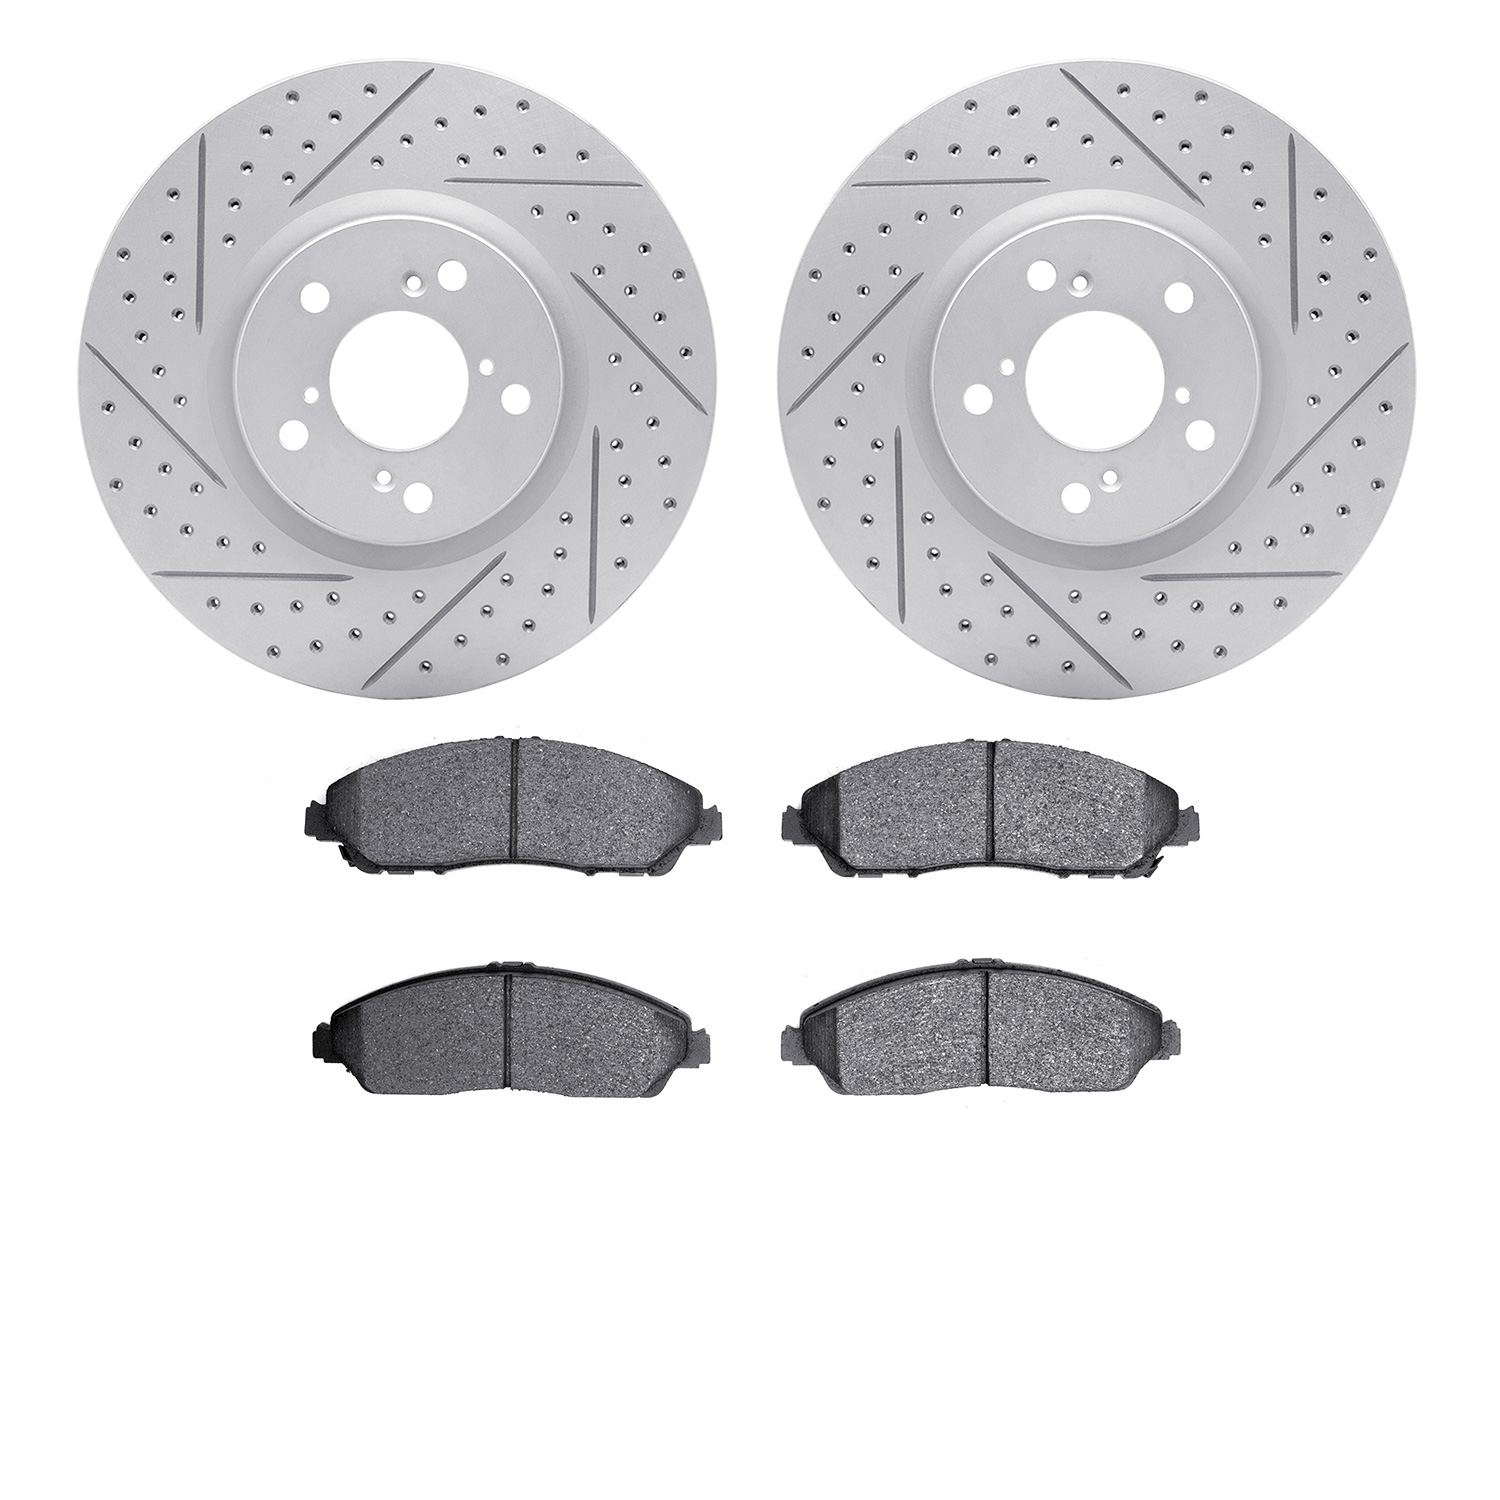 2502-59100 Geoperformance Drilled/Slotted Rotors w/5000 Advanced Brake Pads Kit, 2007-2015 Acura/Honda, Position: Front